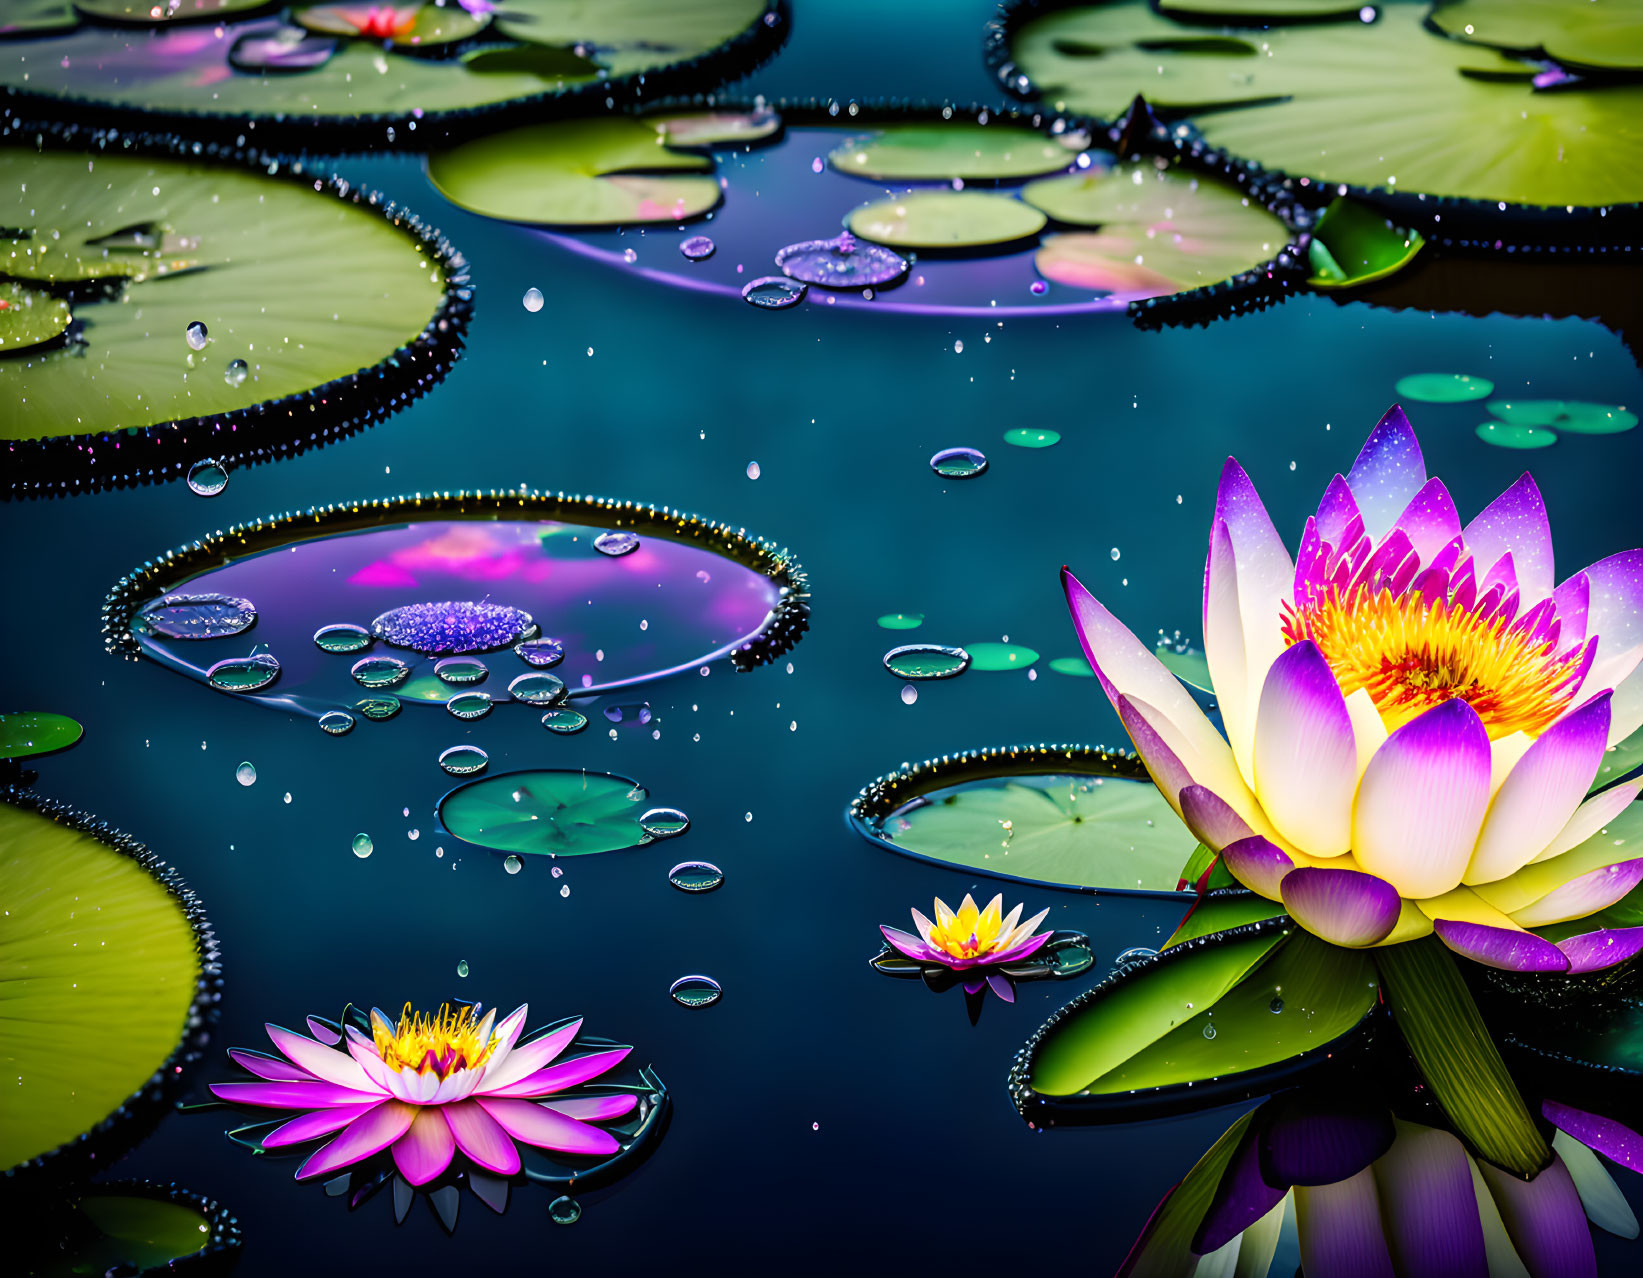 Rain coming down on water lilies on a pond